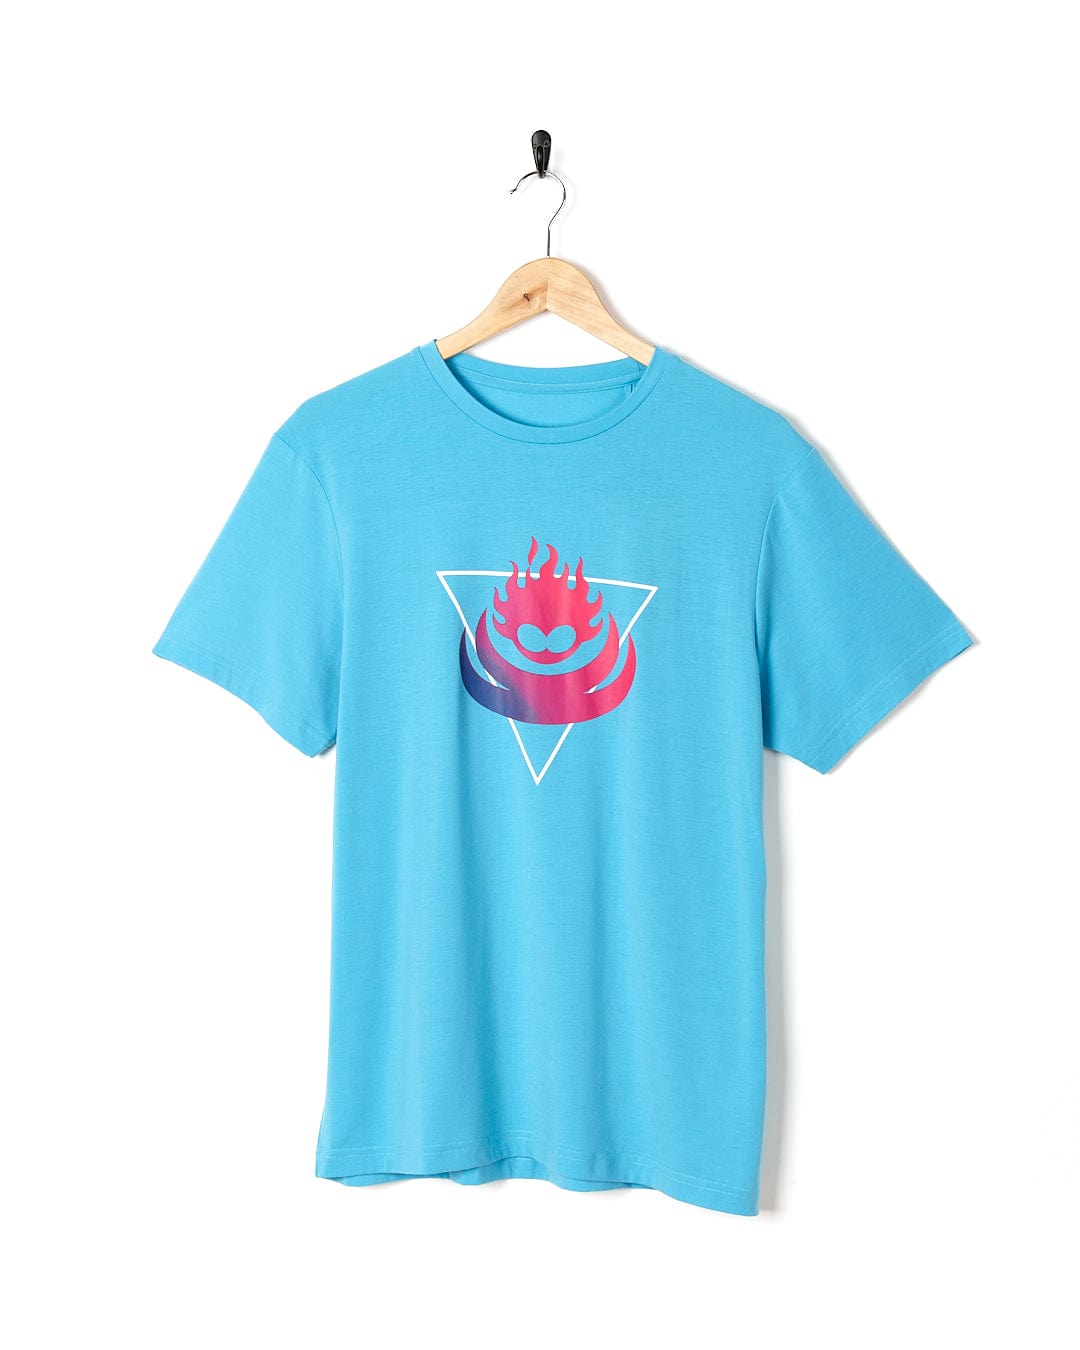 Flame Tri - Mens Recycled Short Sleeve T-Shirt - Teal